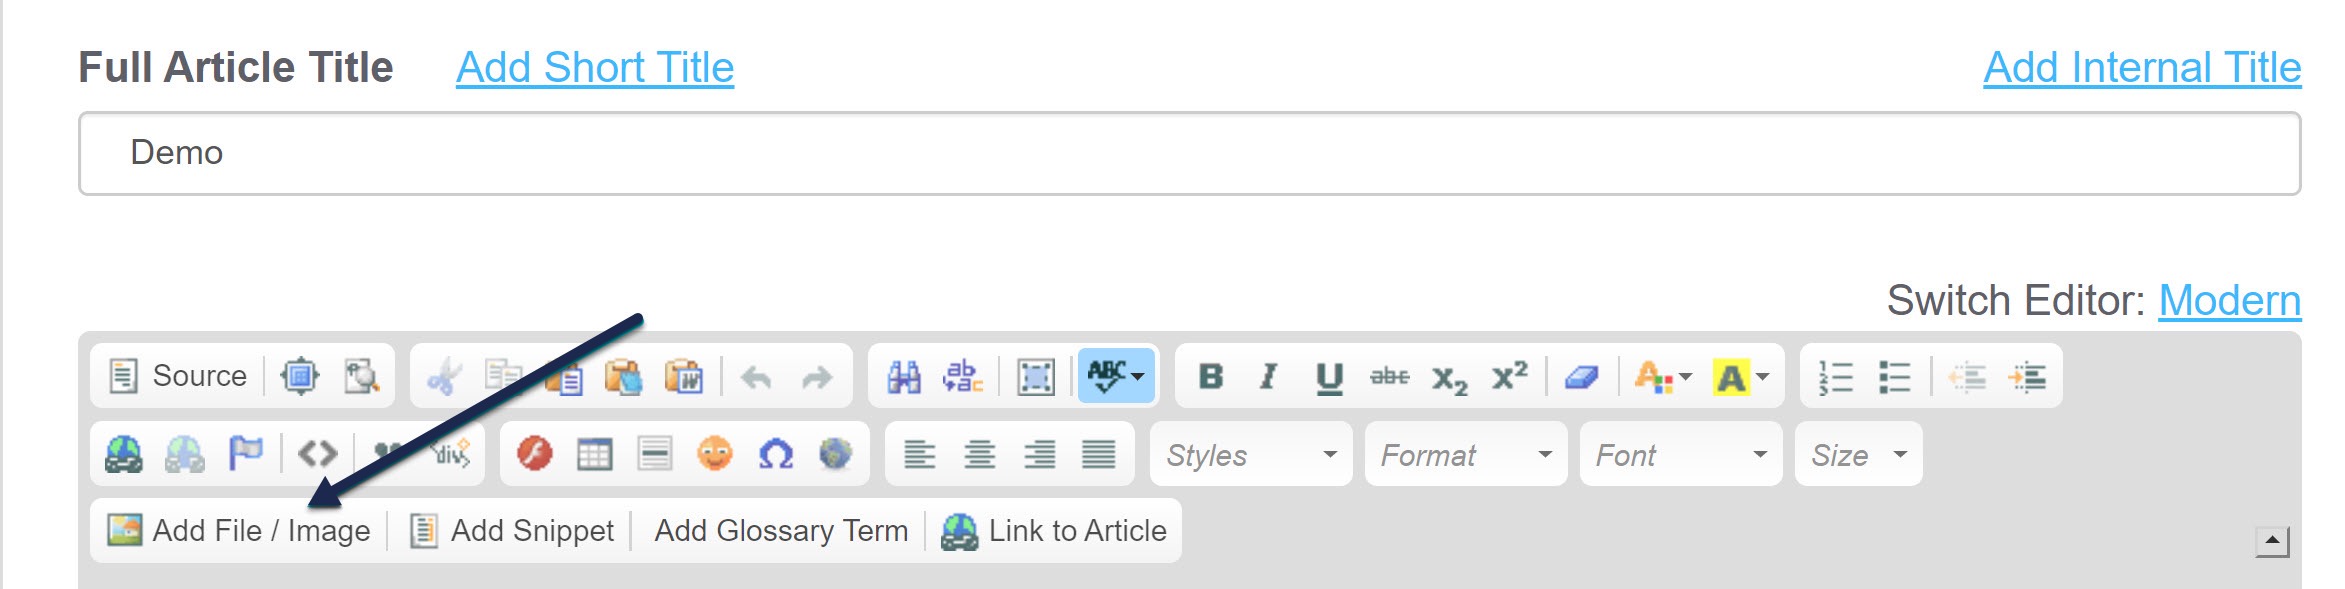 Screenshot showing the Legacy Editor with a callout to the Add File / Image button